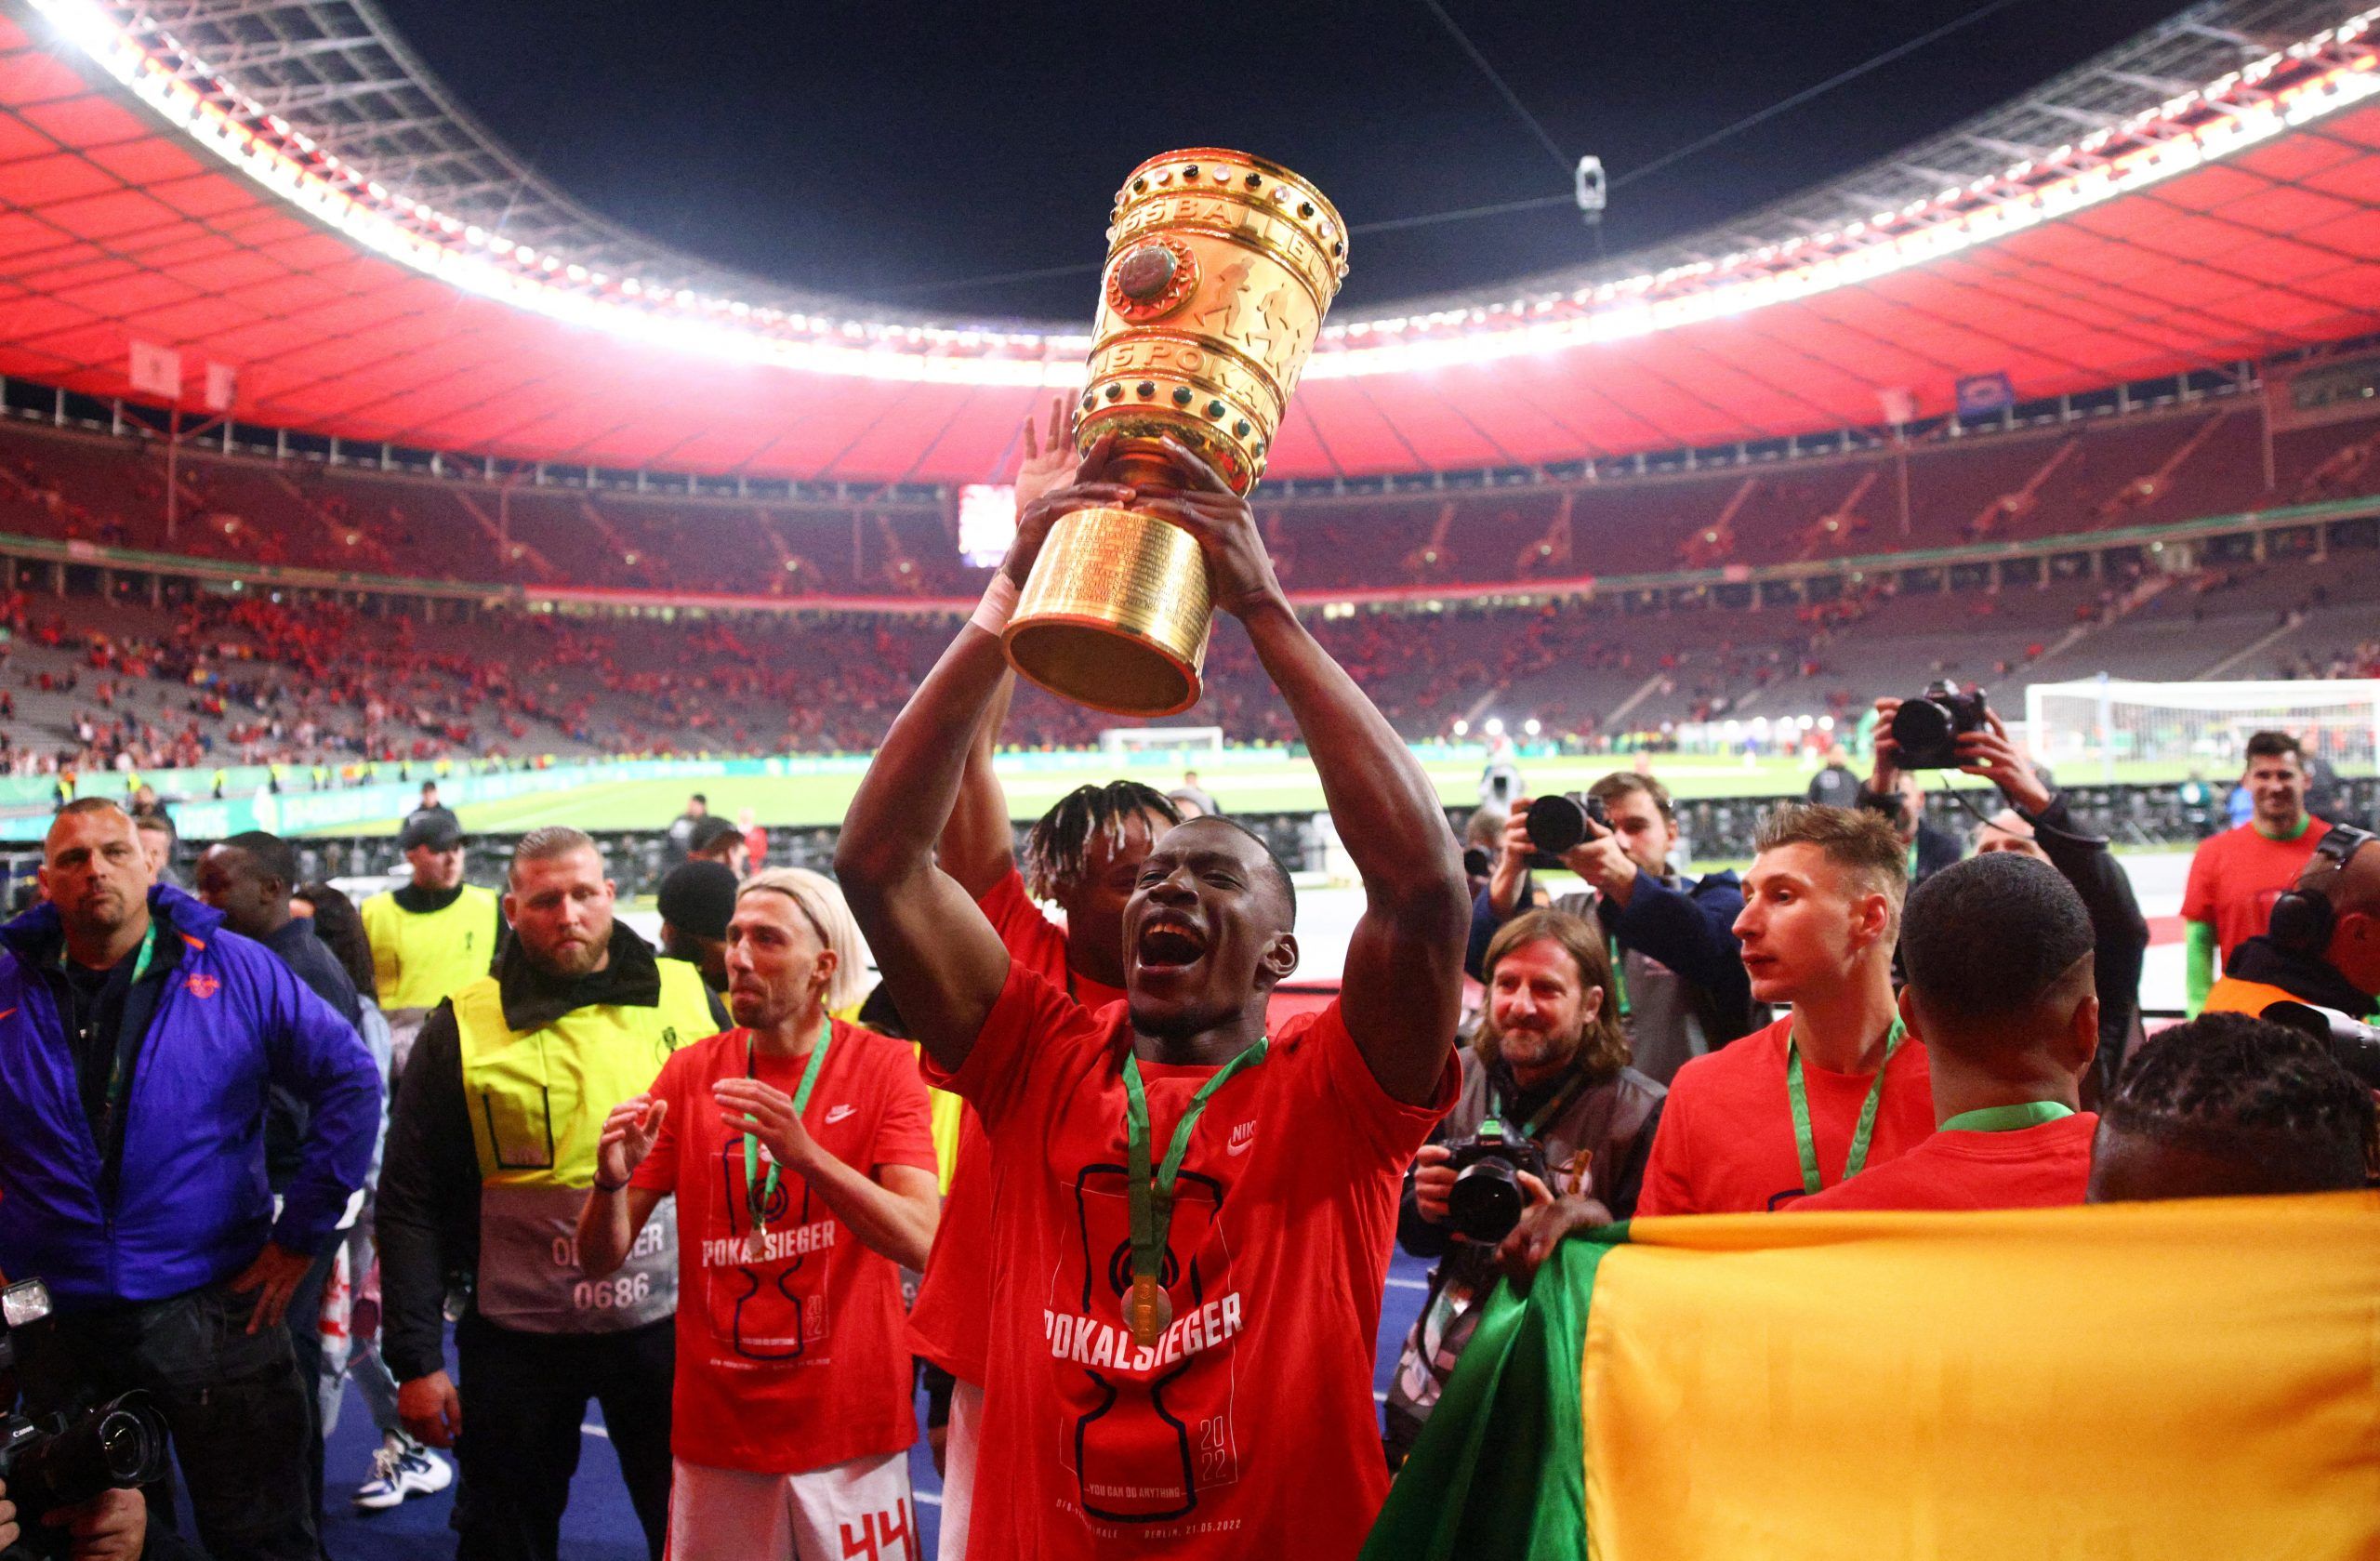 Soccer Football - DFB Cup - Final - SC Freiburg v RB Leipzig - Olympiastadion, Berlin, Germany - May 21, 2022  RB Leipzig's Nordi Mukiele celebrates with the trophy after winning the DFB Cup REUTERS/Lisi Niesner DFB REGULATIONS PROHIBIT ANY USE OF PHOTOGRAPHS AS IMAGE SEQUENCES AND/OR QUASI-VIDEO.